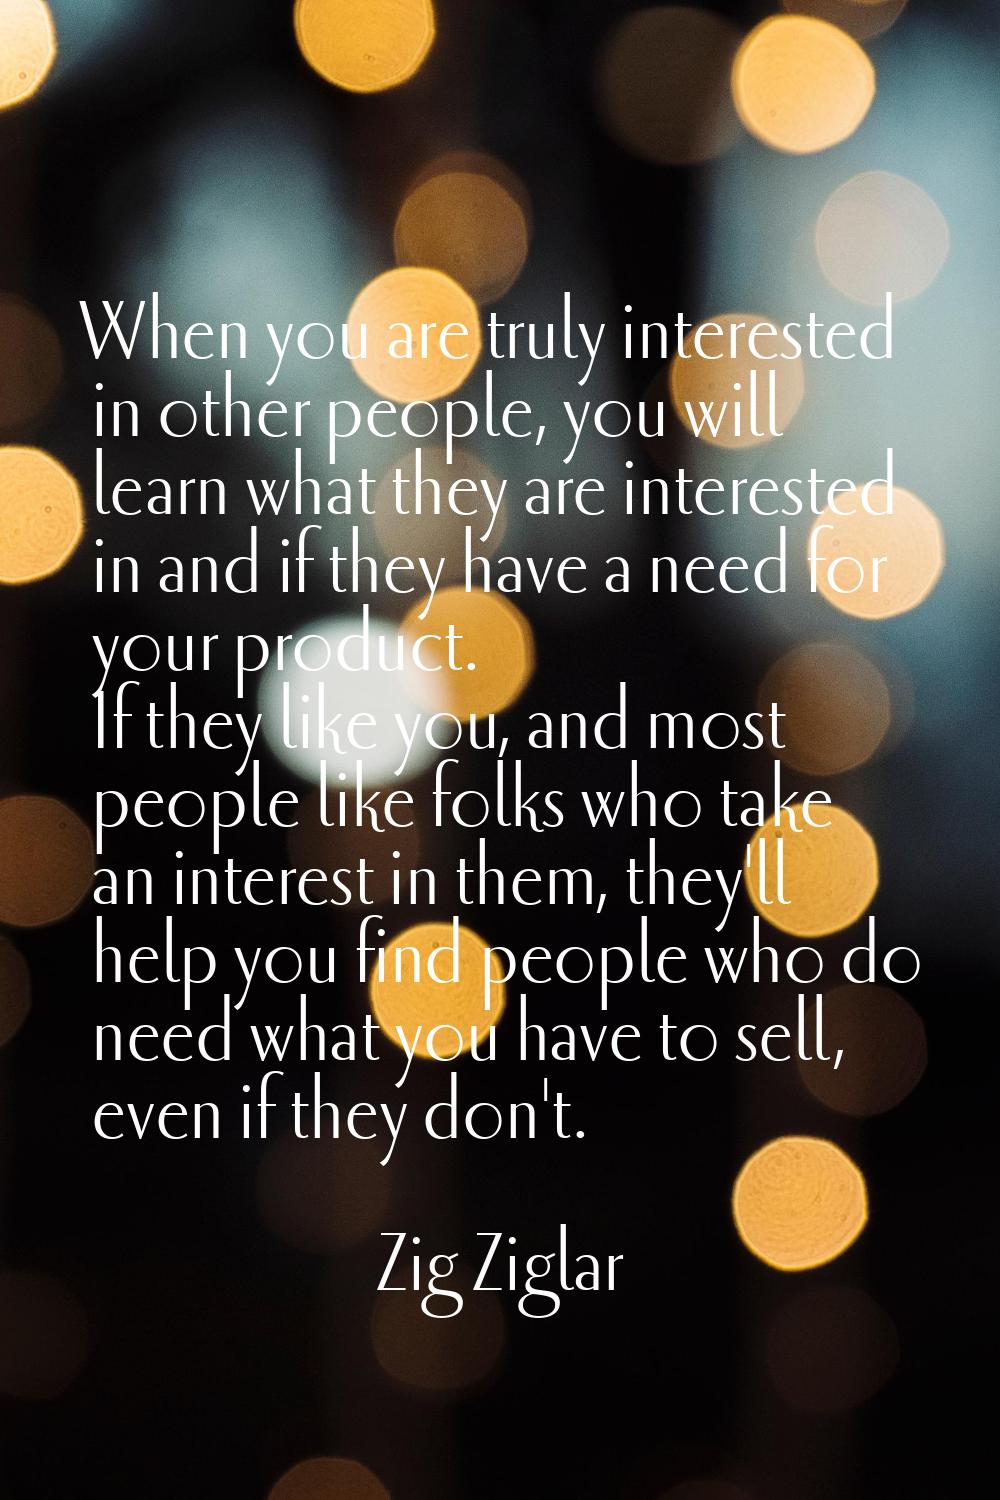 When you are truly interested in other people, you will learn what they are interested in and if th